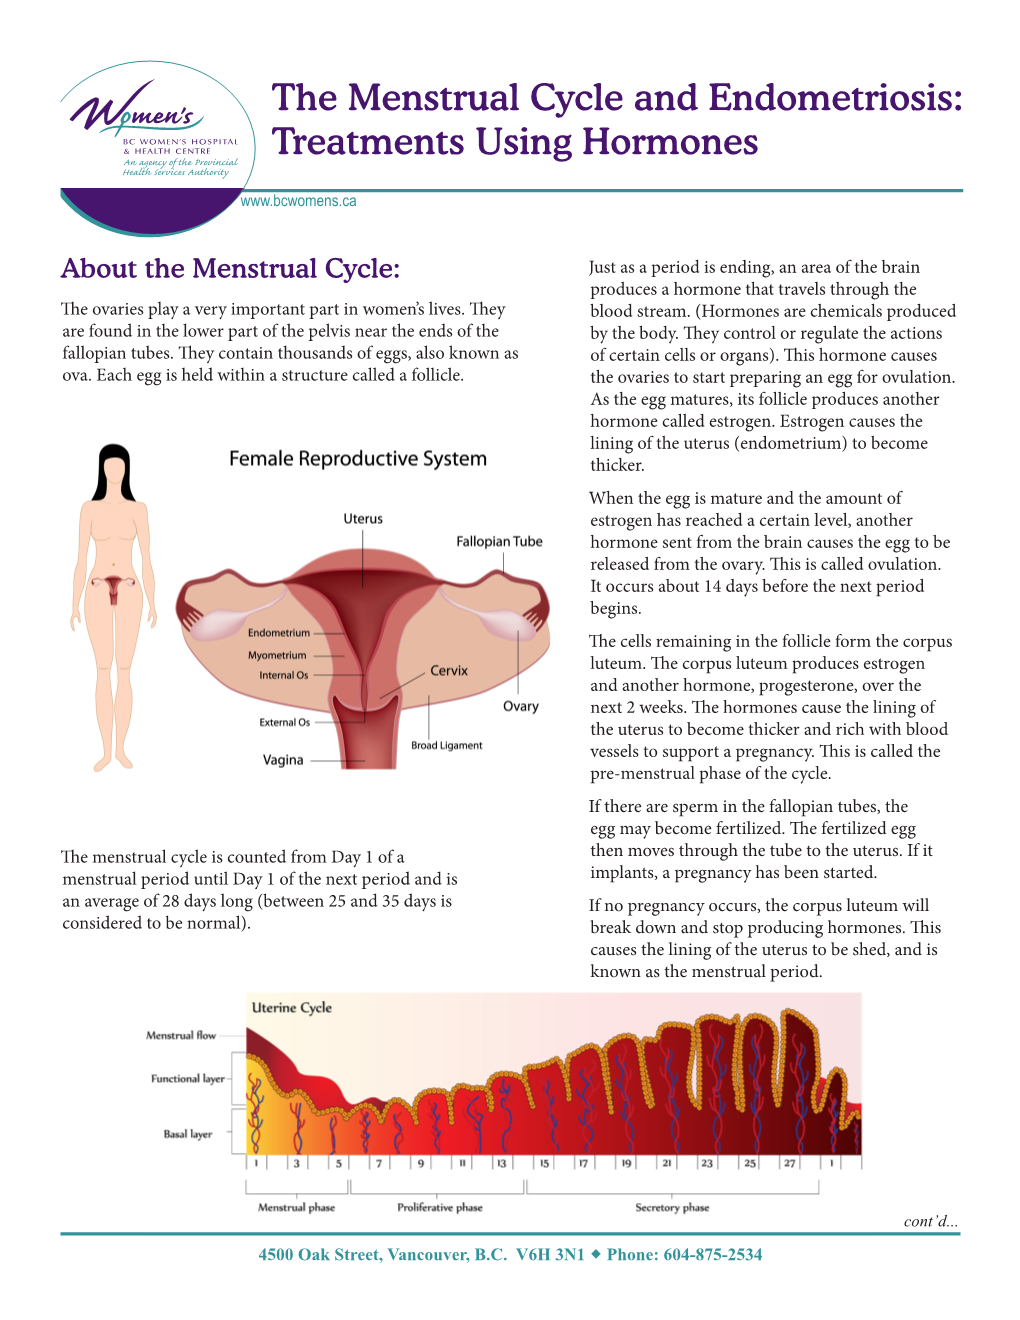 The Menstrual Cycle and Endometriosis: Treatments Using Hormones